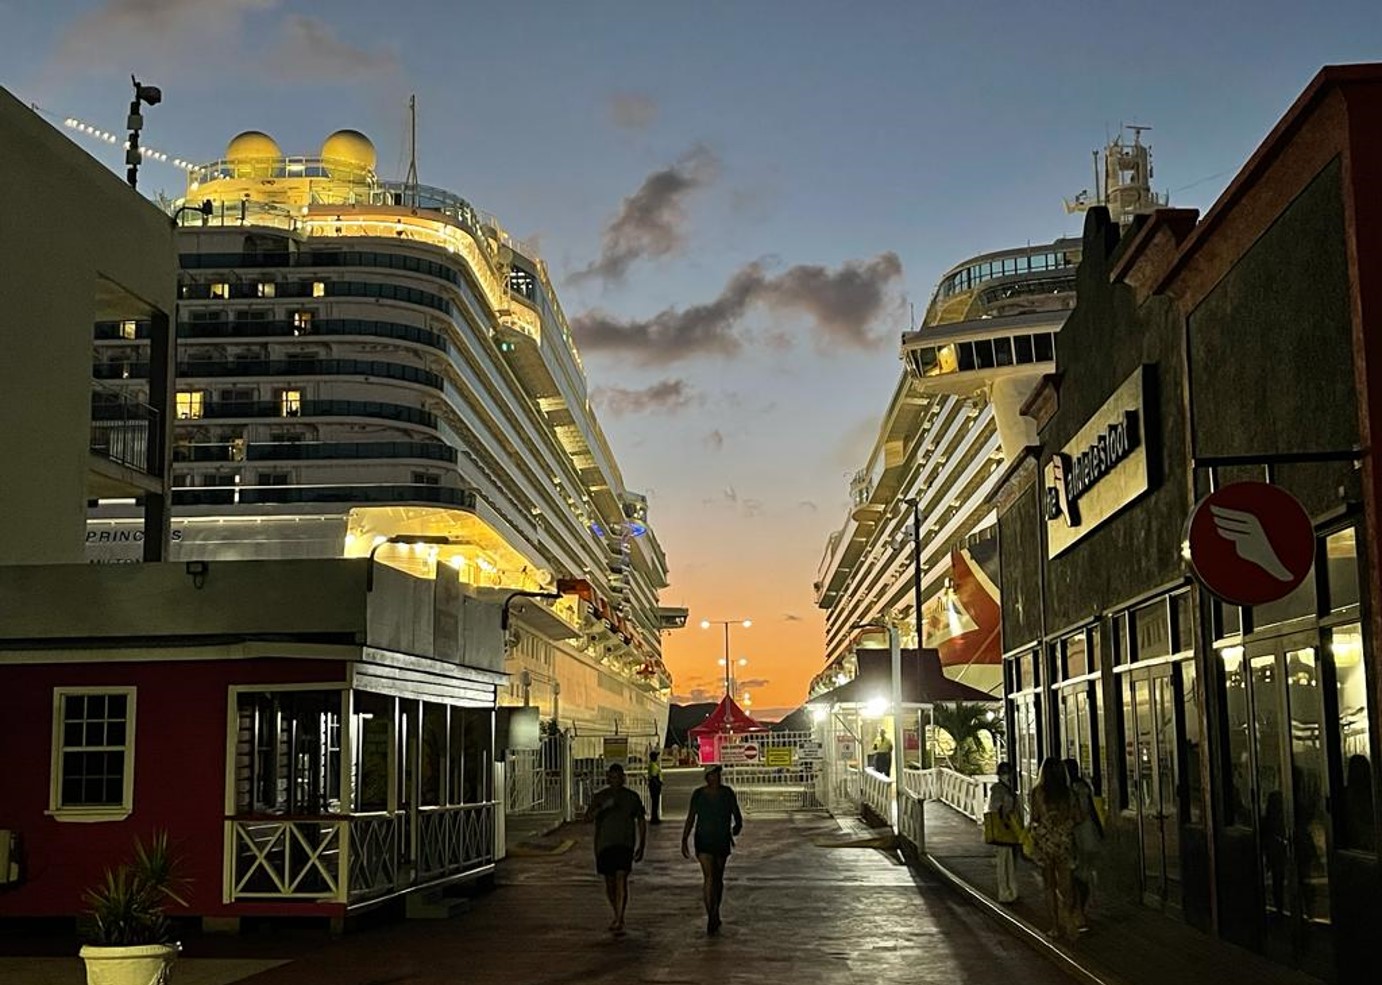 $25 Million Dollar Investment In Antigua Cruise Port Upland Works To Begin By April 2022 (November 2021)